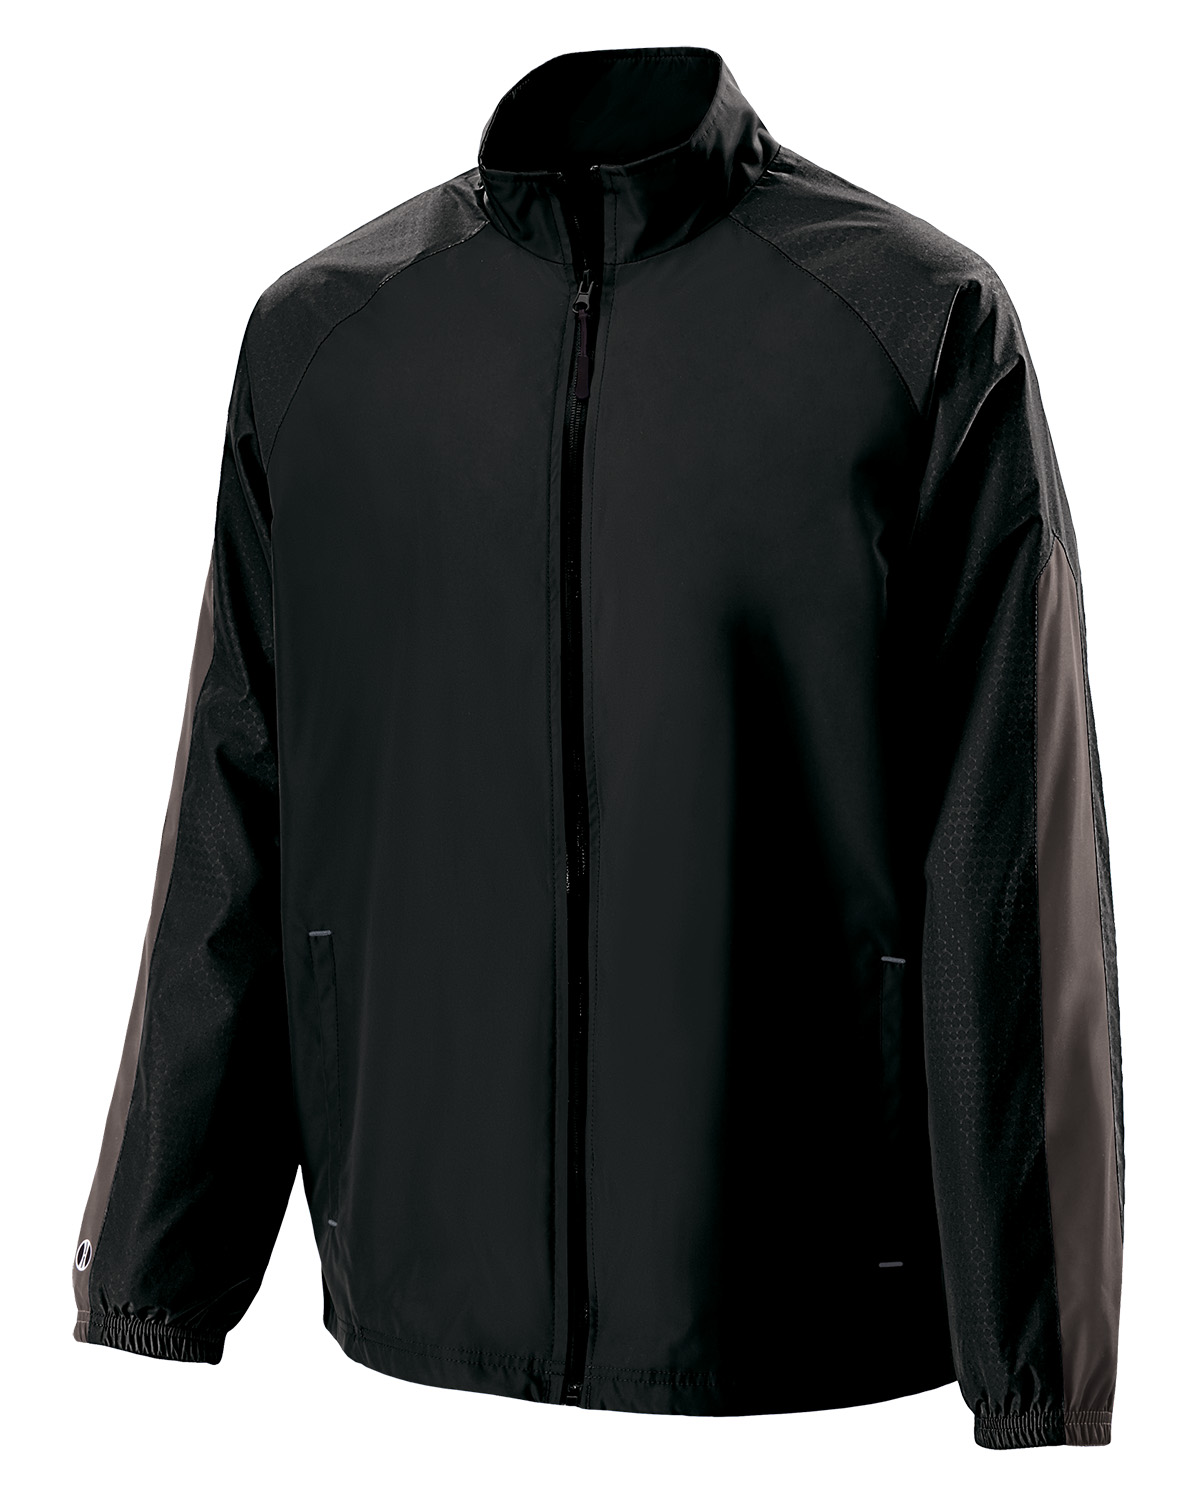 Holloway 222212 - Youth Polyester Bionic Jacket